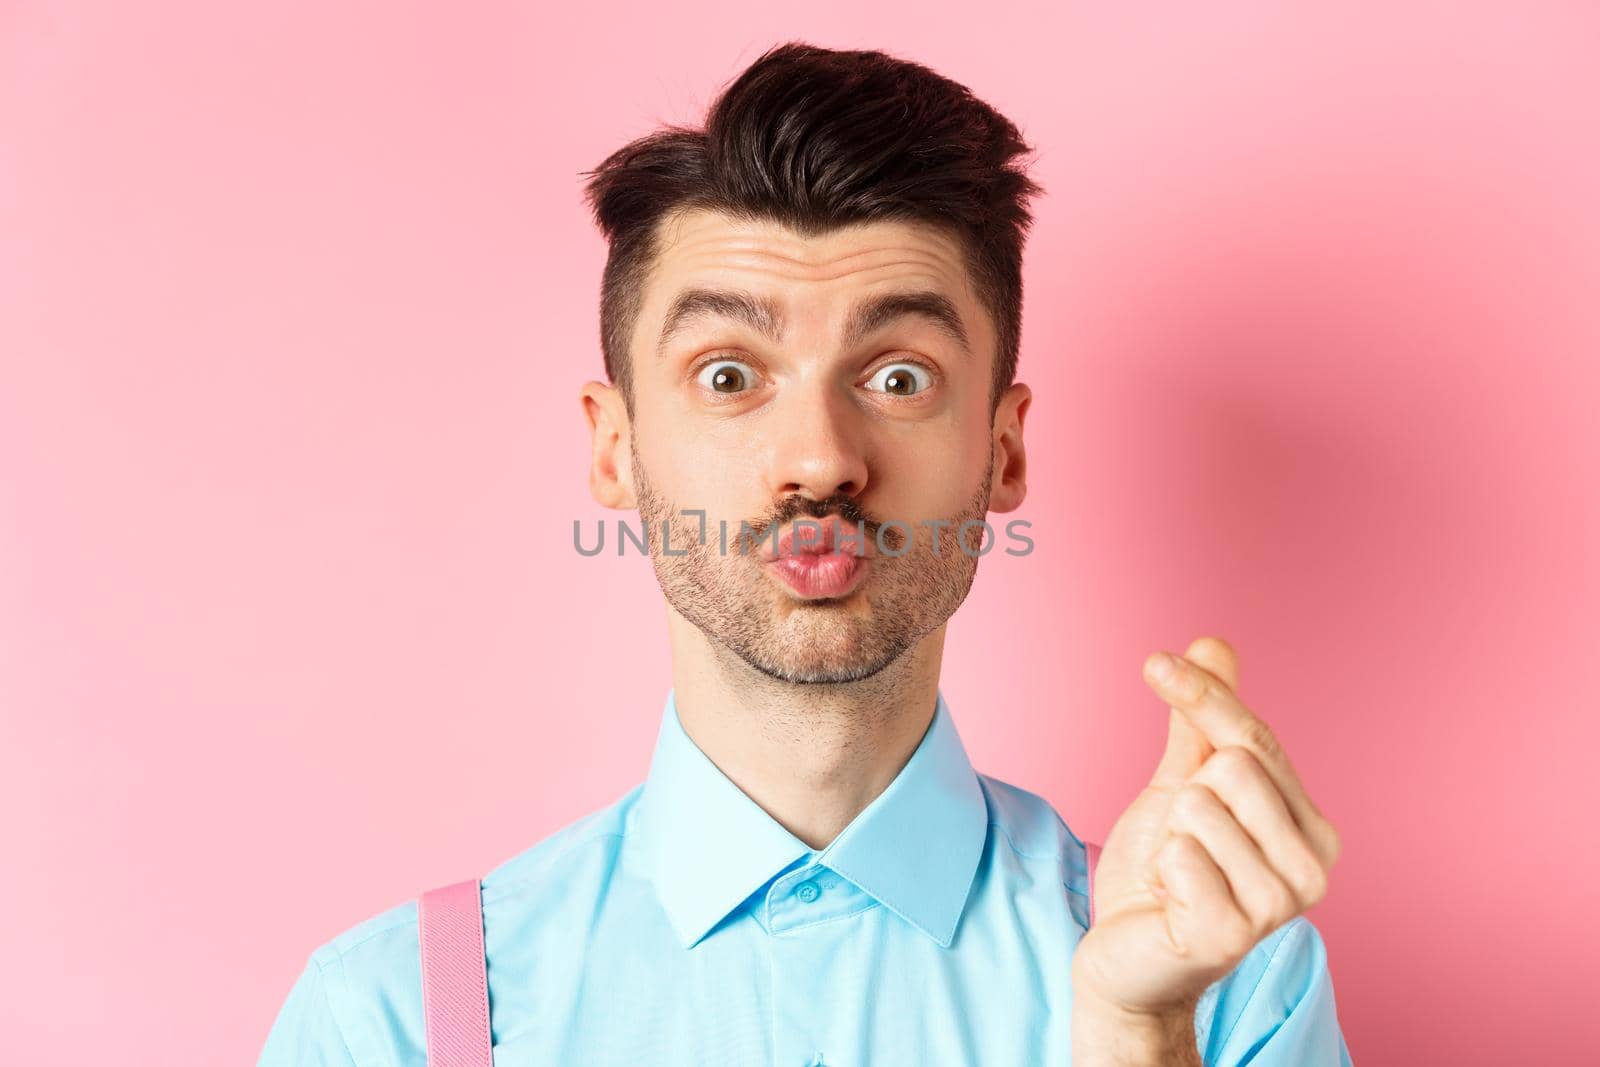 Valentines day concept. Silly guy waiting for kiss and showing finger heart gesture, express love and sympathy, pink background.